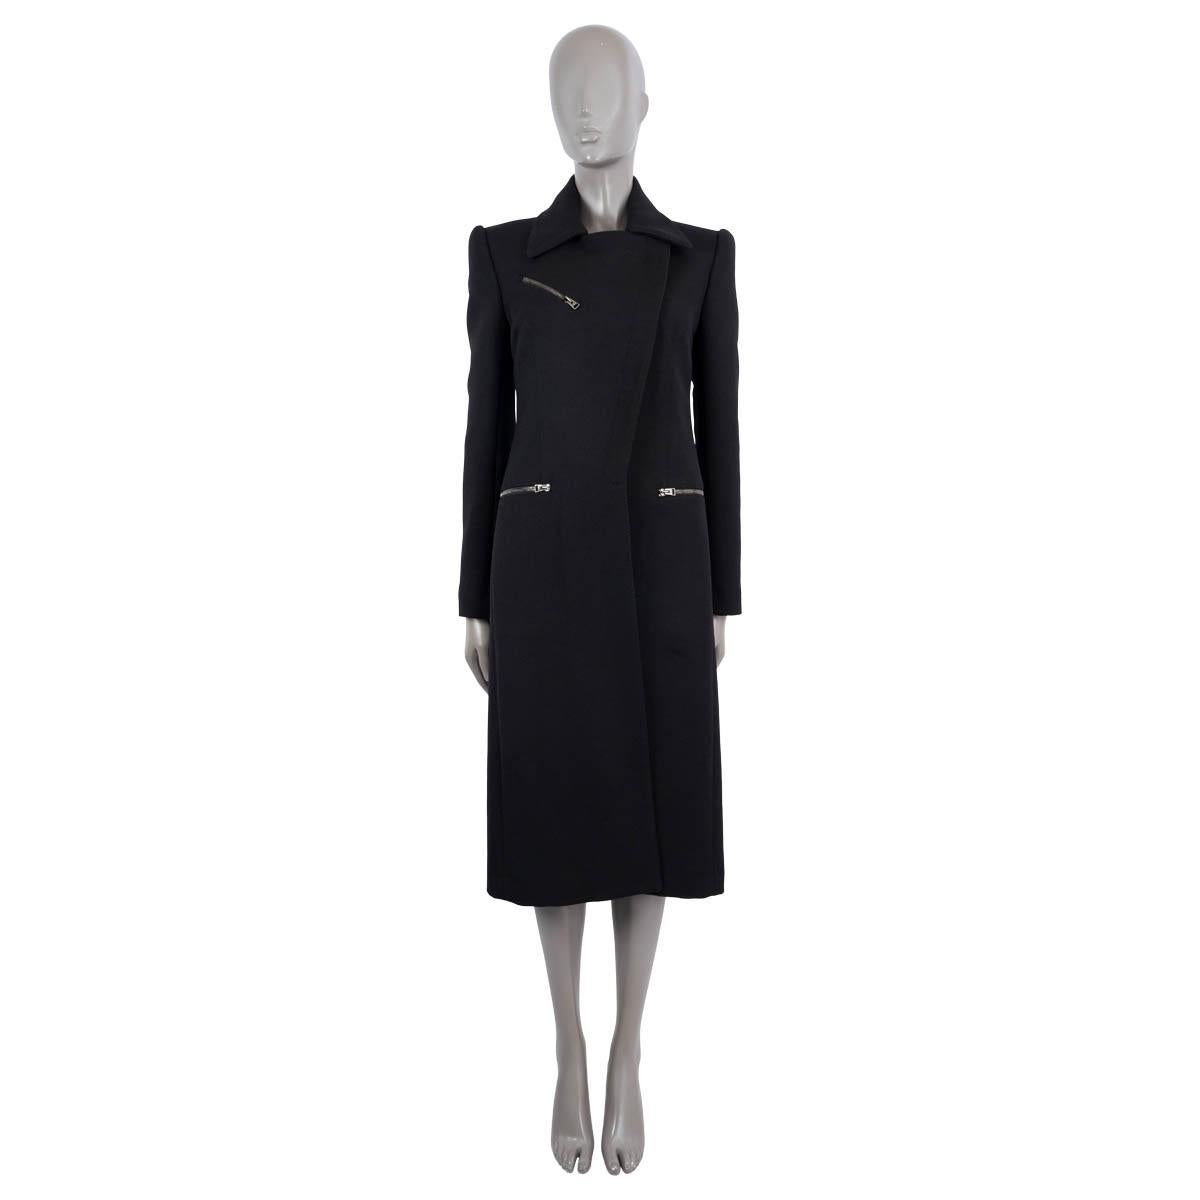 100% authentic Tom Ford zip front coat in black wool (99%) and silk (1%). Features zipper pockets on the sides,  zipper cuffs and zipper chest. Slit on the back. Closes with half zipper on the front. Lined in black silk (90%) and elastane (10%). Has